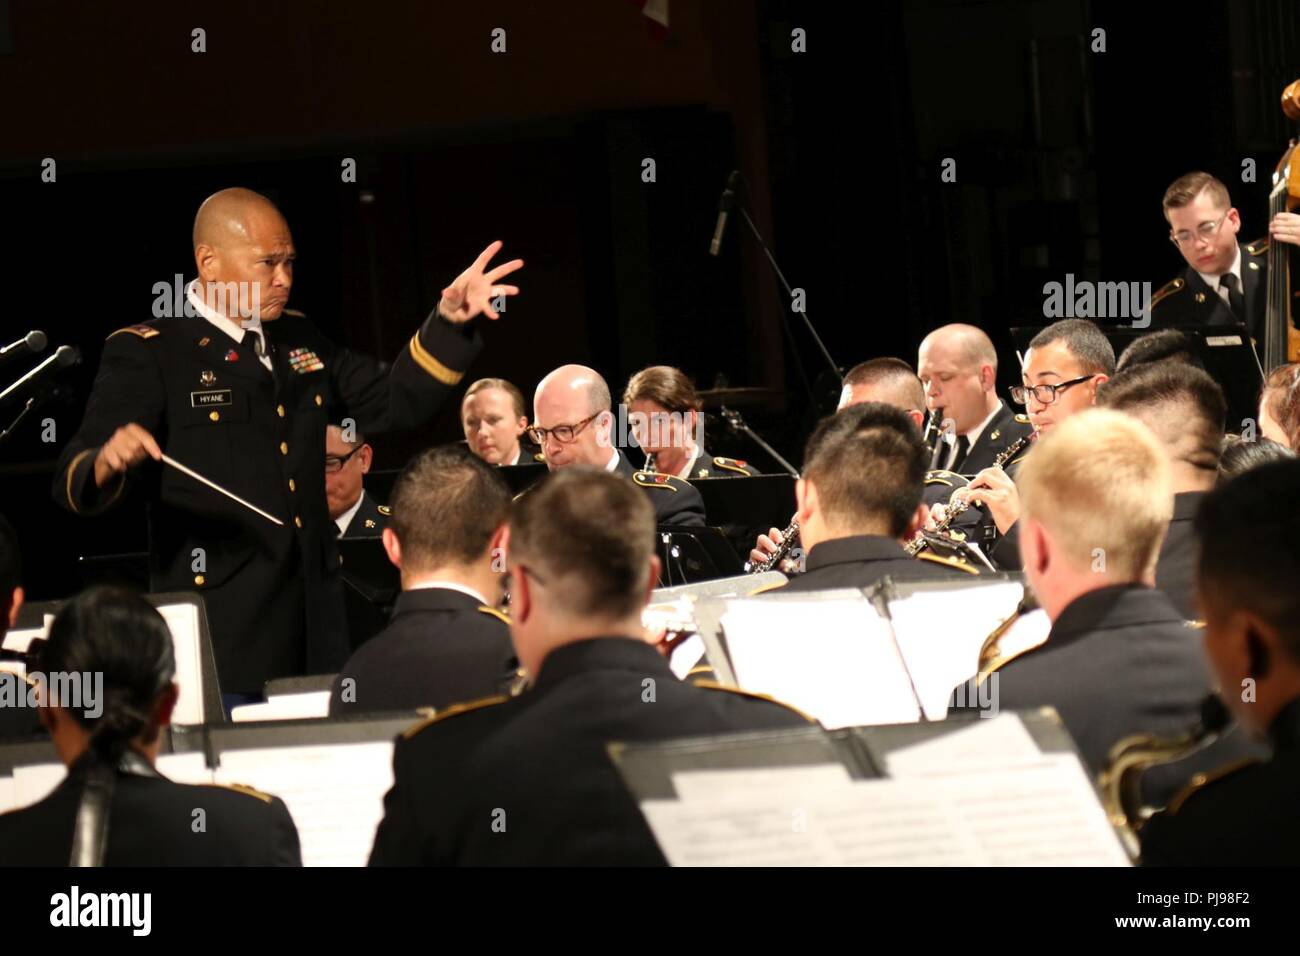 Chief Warrant Officer Four Curtis Hiyane, Commander of the 111th Army Band, conducts a song during the joint concert of the 111th Army Band and 234th Army Band at Astoria High School in Astoria, Oregon, July 7, 2018. The concert is the second collaboration between the 111th Army Band and the 234th Army Band with efforts to display the results of their training in a live setting. Stock Photo